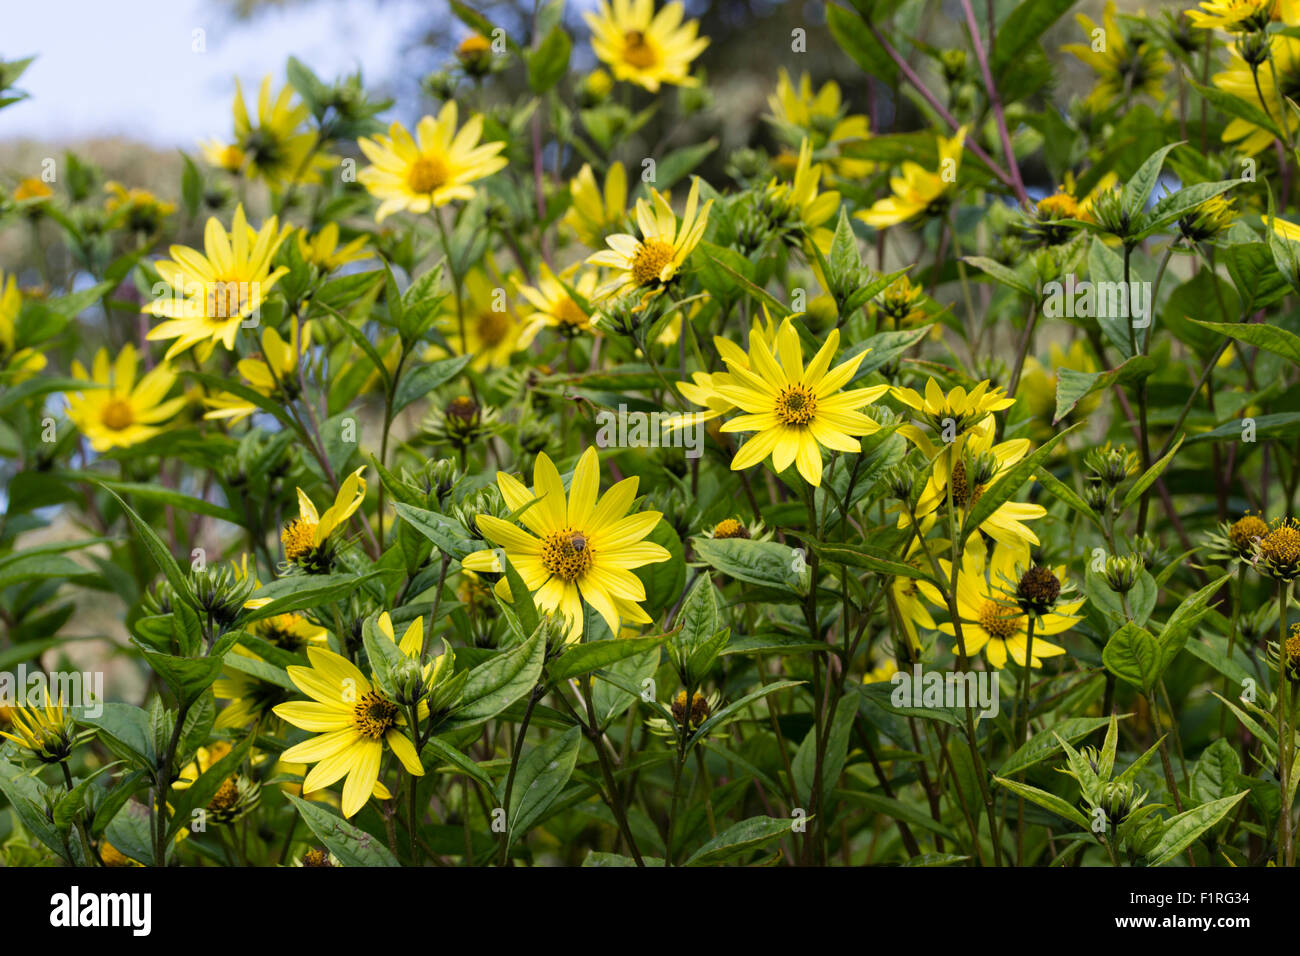 Lemon yellow flowers of the tall growing, early Autumn flowering perennial, Helianthus 'Lemon Queen' Stock Photo